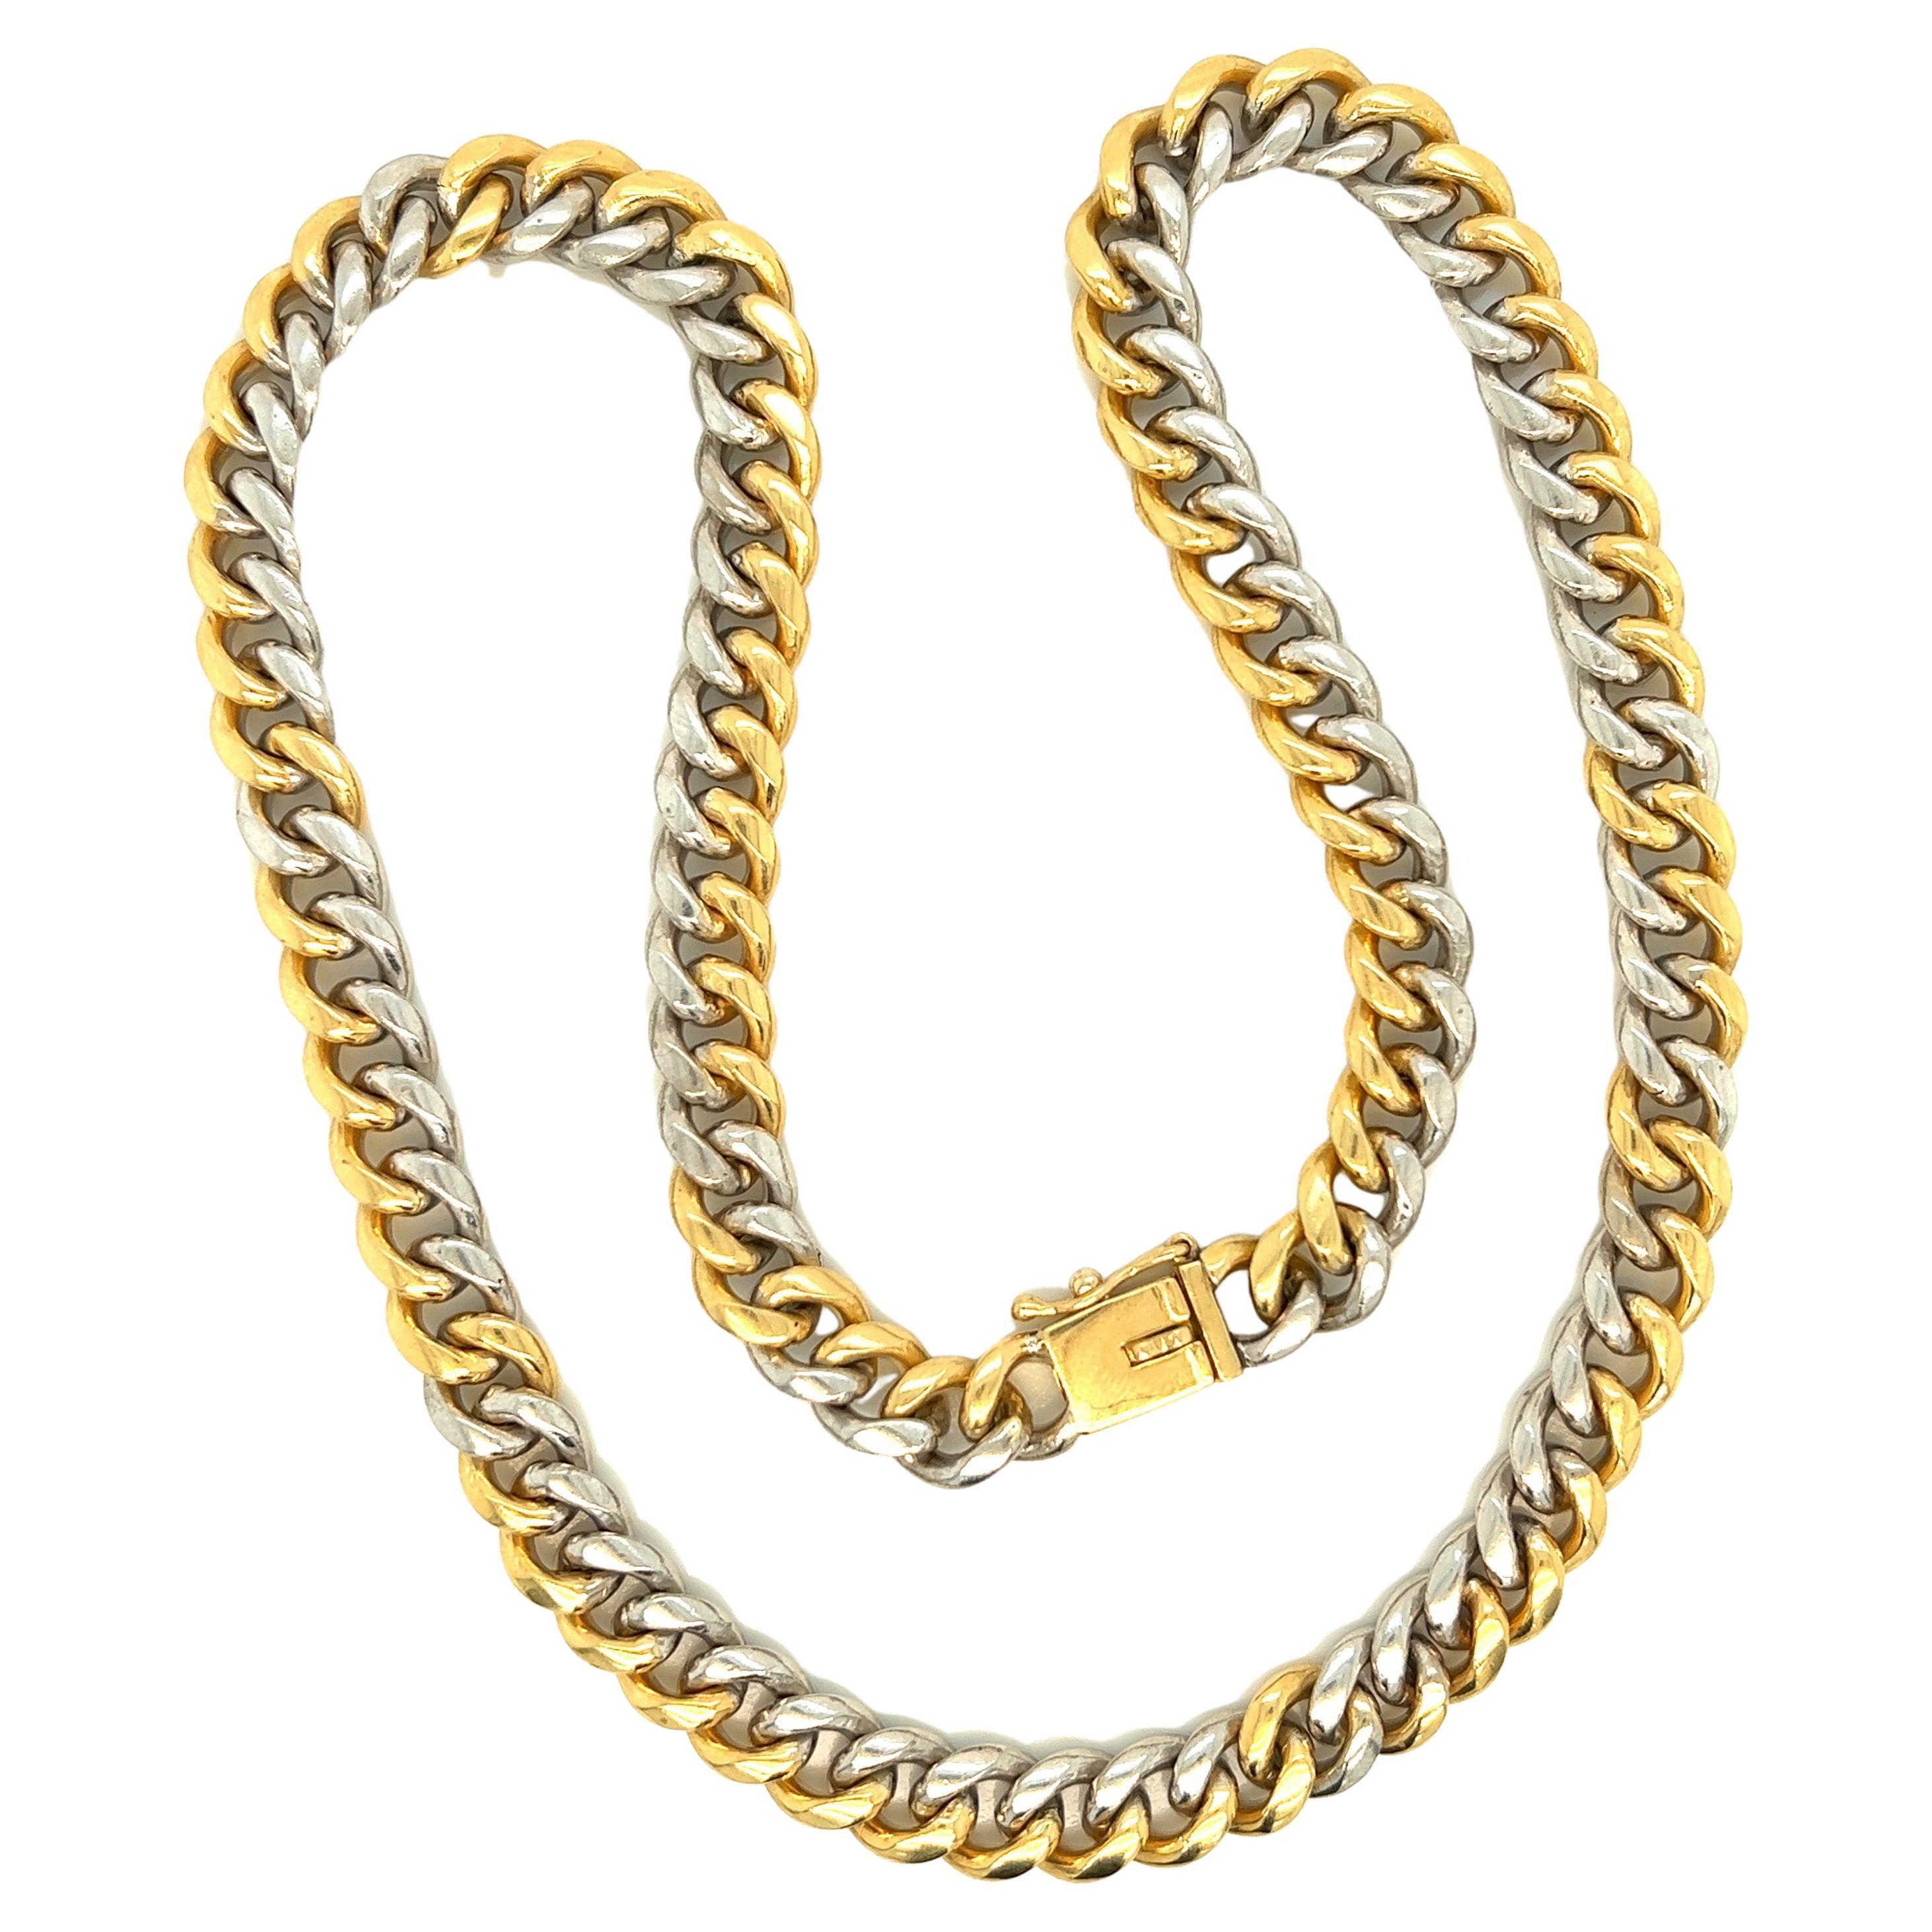 Bvlgari Two-Tone 18kt Gold Chain Link Necklace 